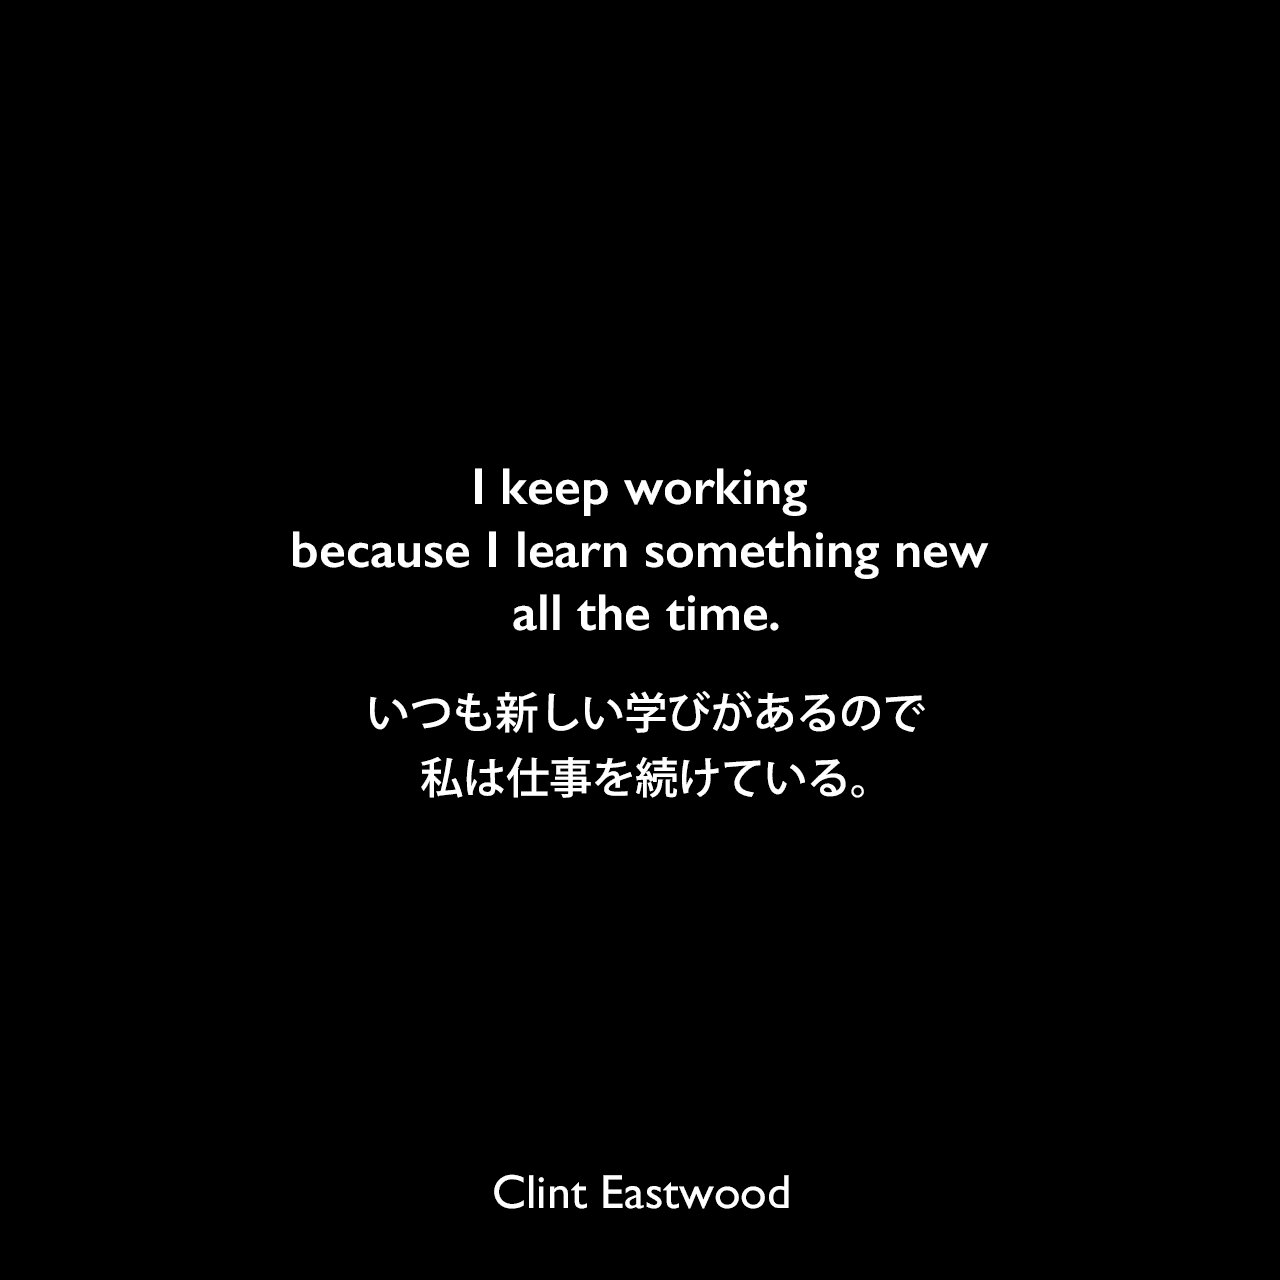 I keep working because I learn something new all the time.いつも新しい学びがあるので、私は仕事を続けている。Clint Eastwood